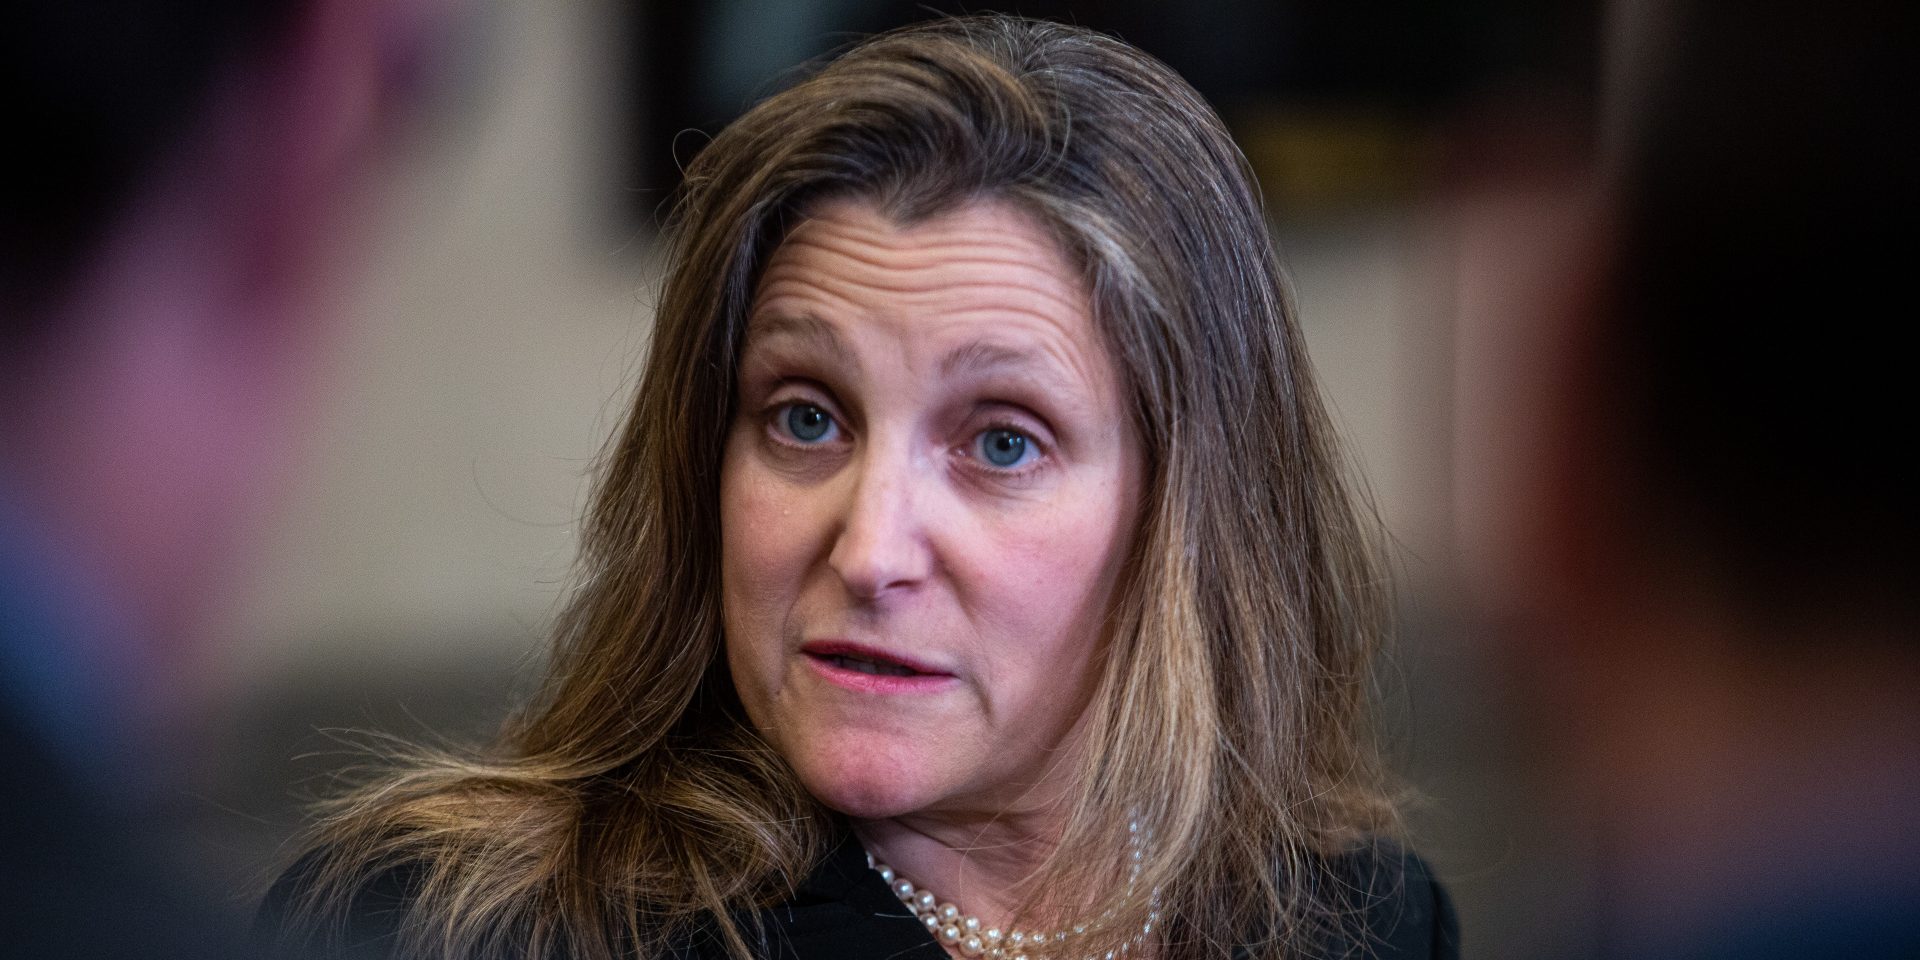 Minister of Finance Chrystia Freeland scrums with reporters after the Liberal party caucus meeting in West Block  on May 17, 2023, to answer questions abut the dispute over the Stellantis facility in Windsor. The Hill Times photograph by Andrew Meade